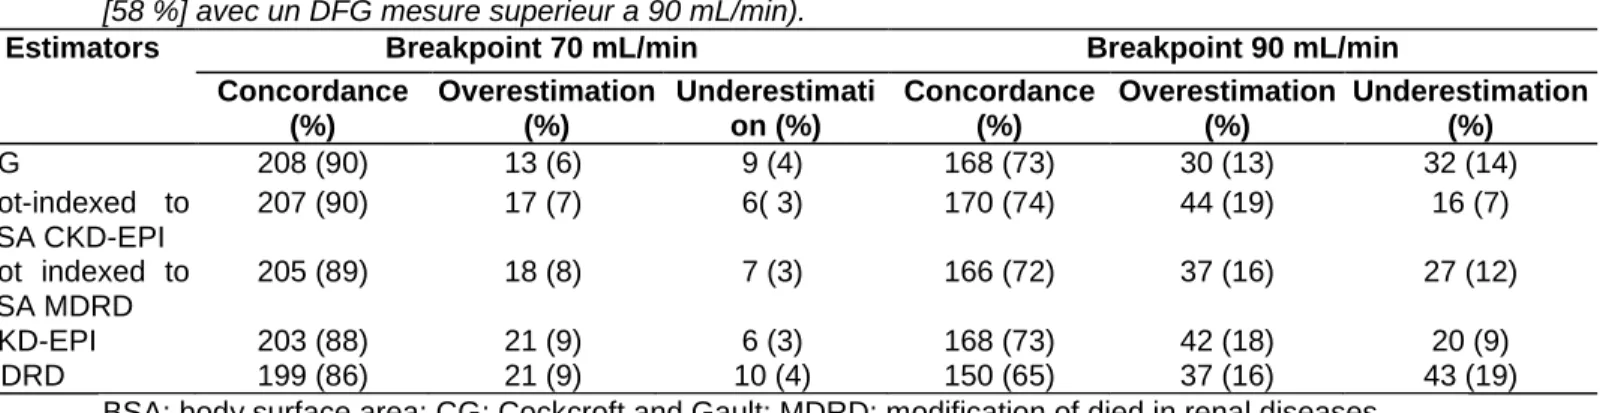 Table 2: Concordance between estimated GFR and measured GFR at two breakpoints (90 and  70mL/min) (183 patients [79.5%] had a GFR&gt;70 mL/min, and 133 patients (58%) had a GFR &gt; 90  mL/min)